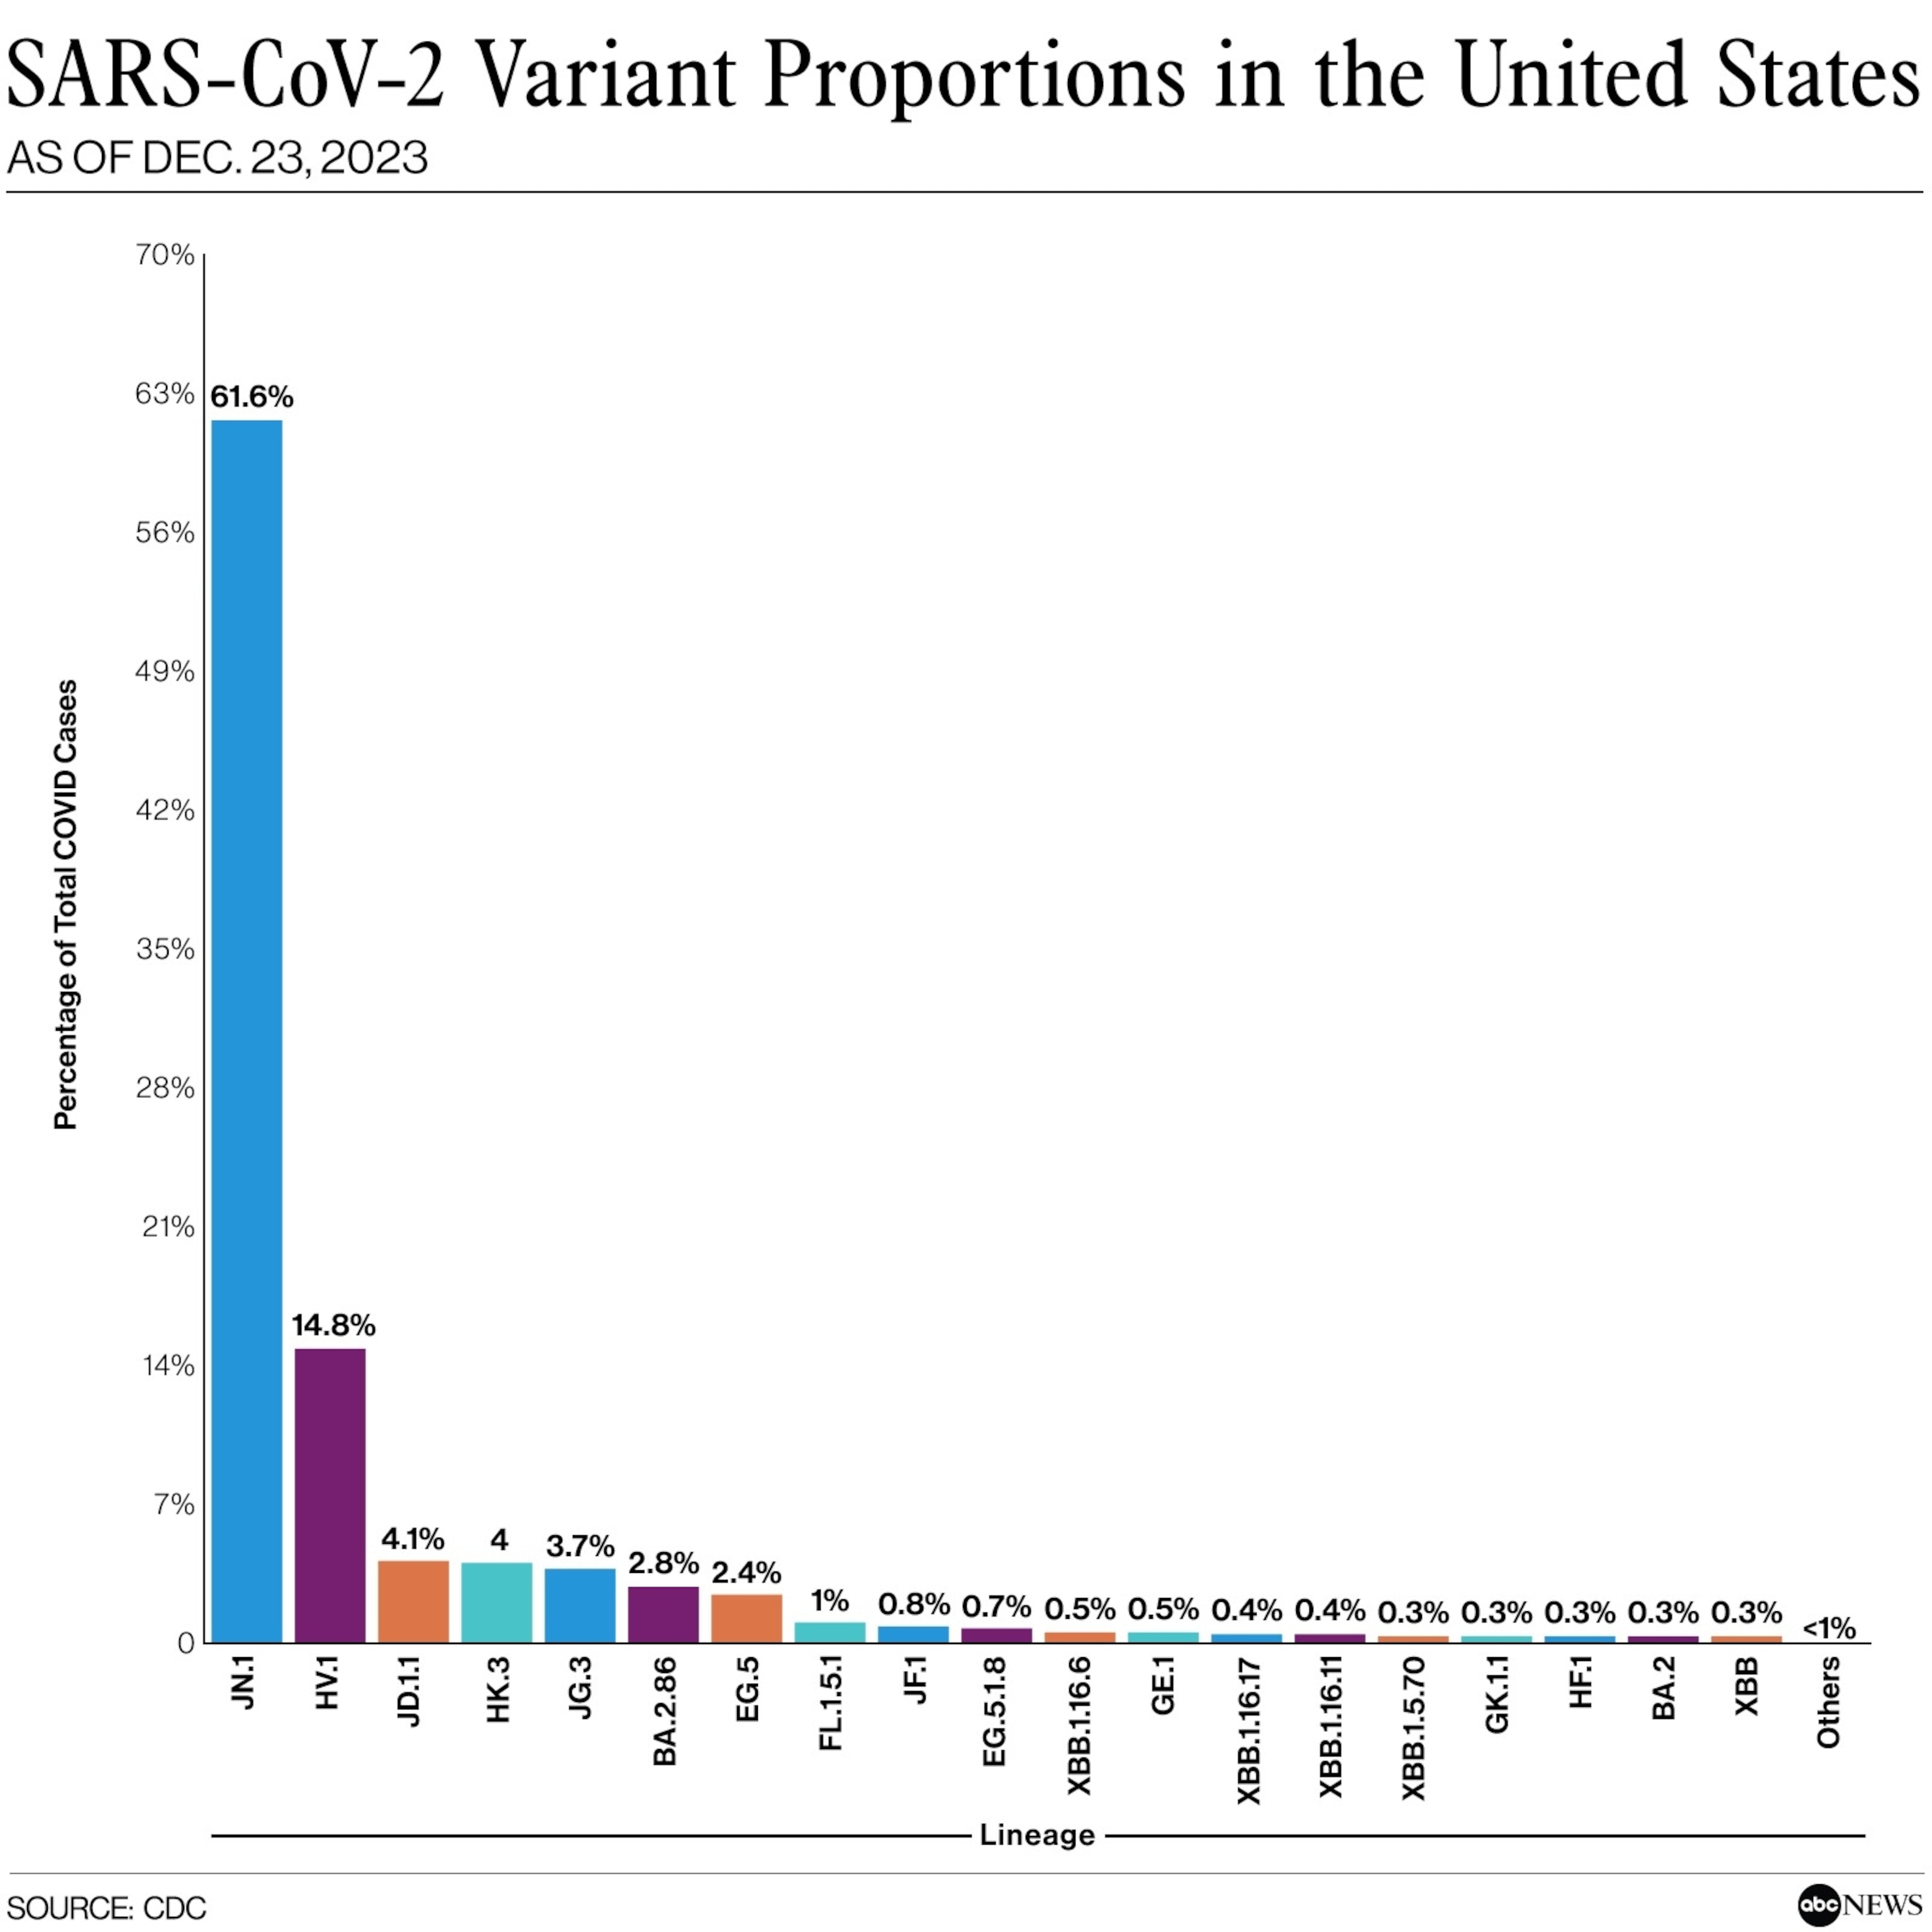 PHOTO: SARS-CoV-2 Variant Proportions in the United States